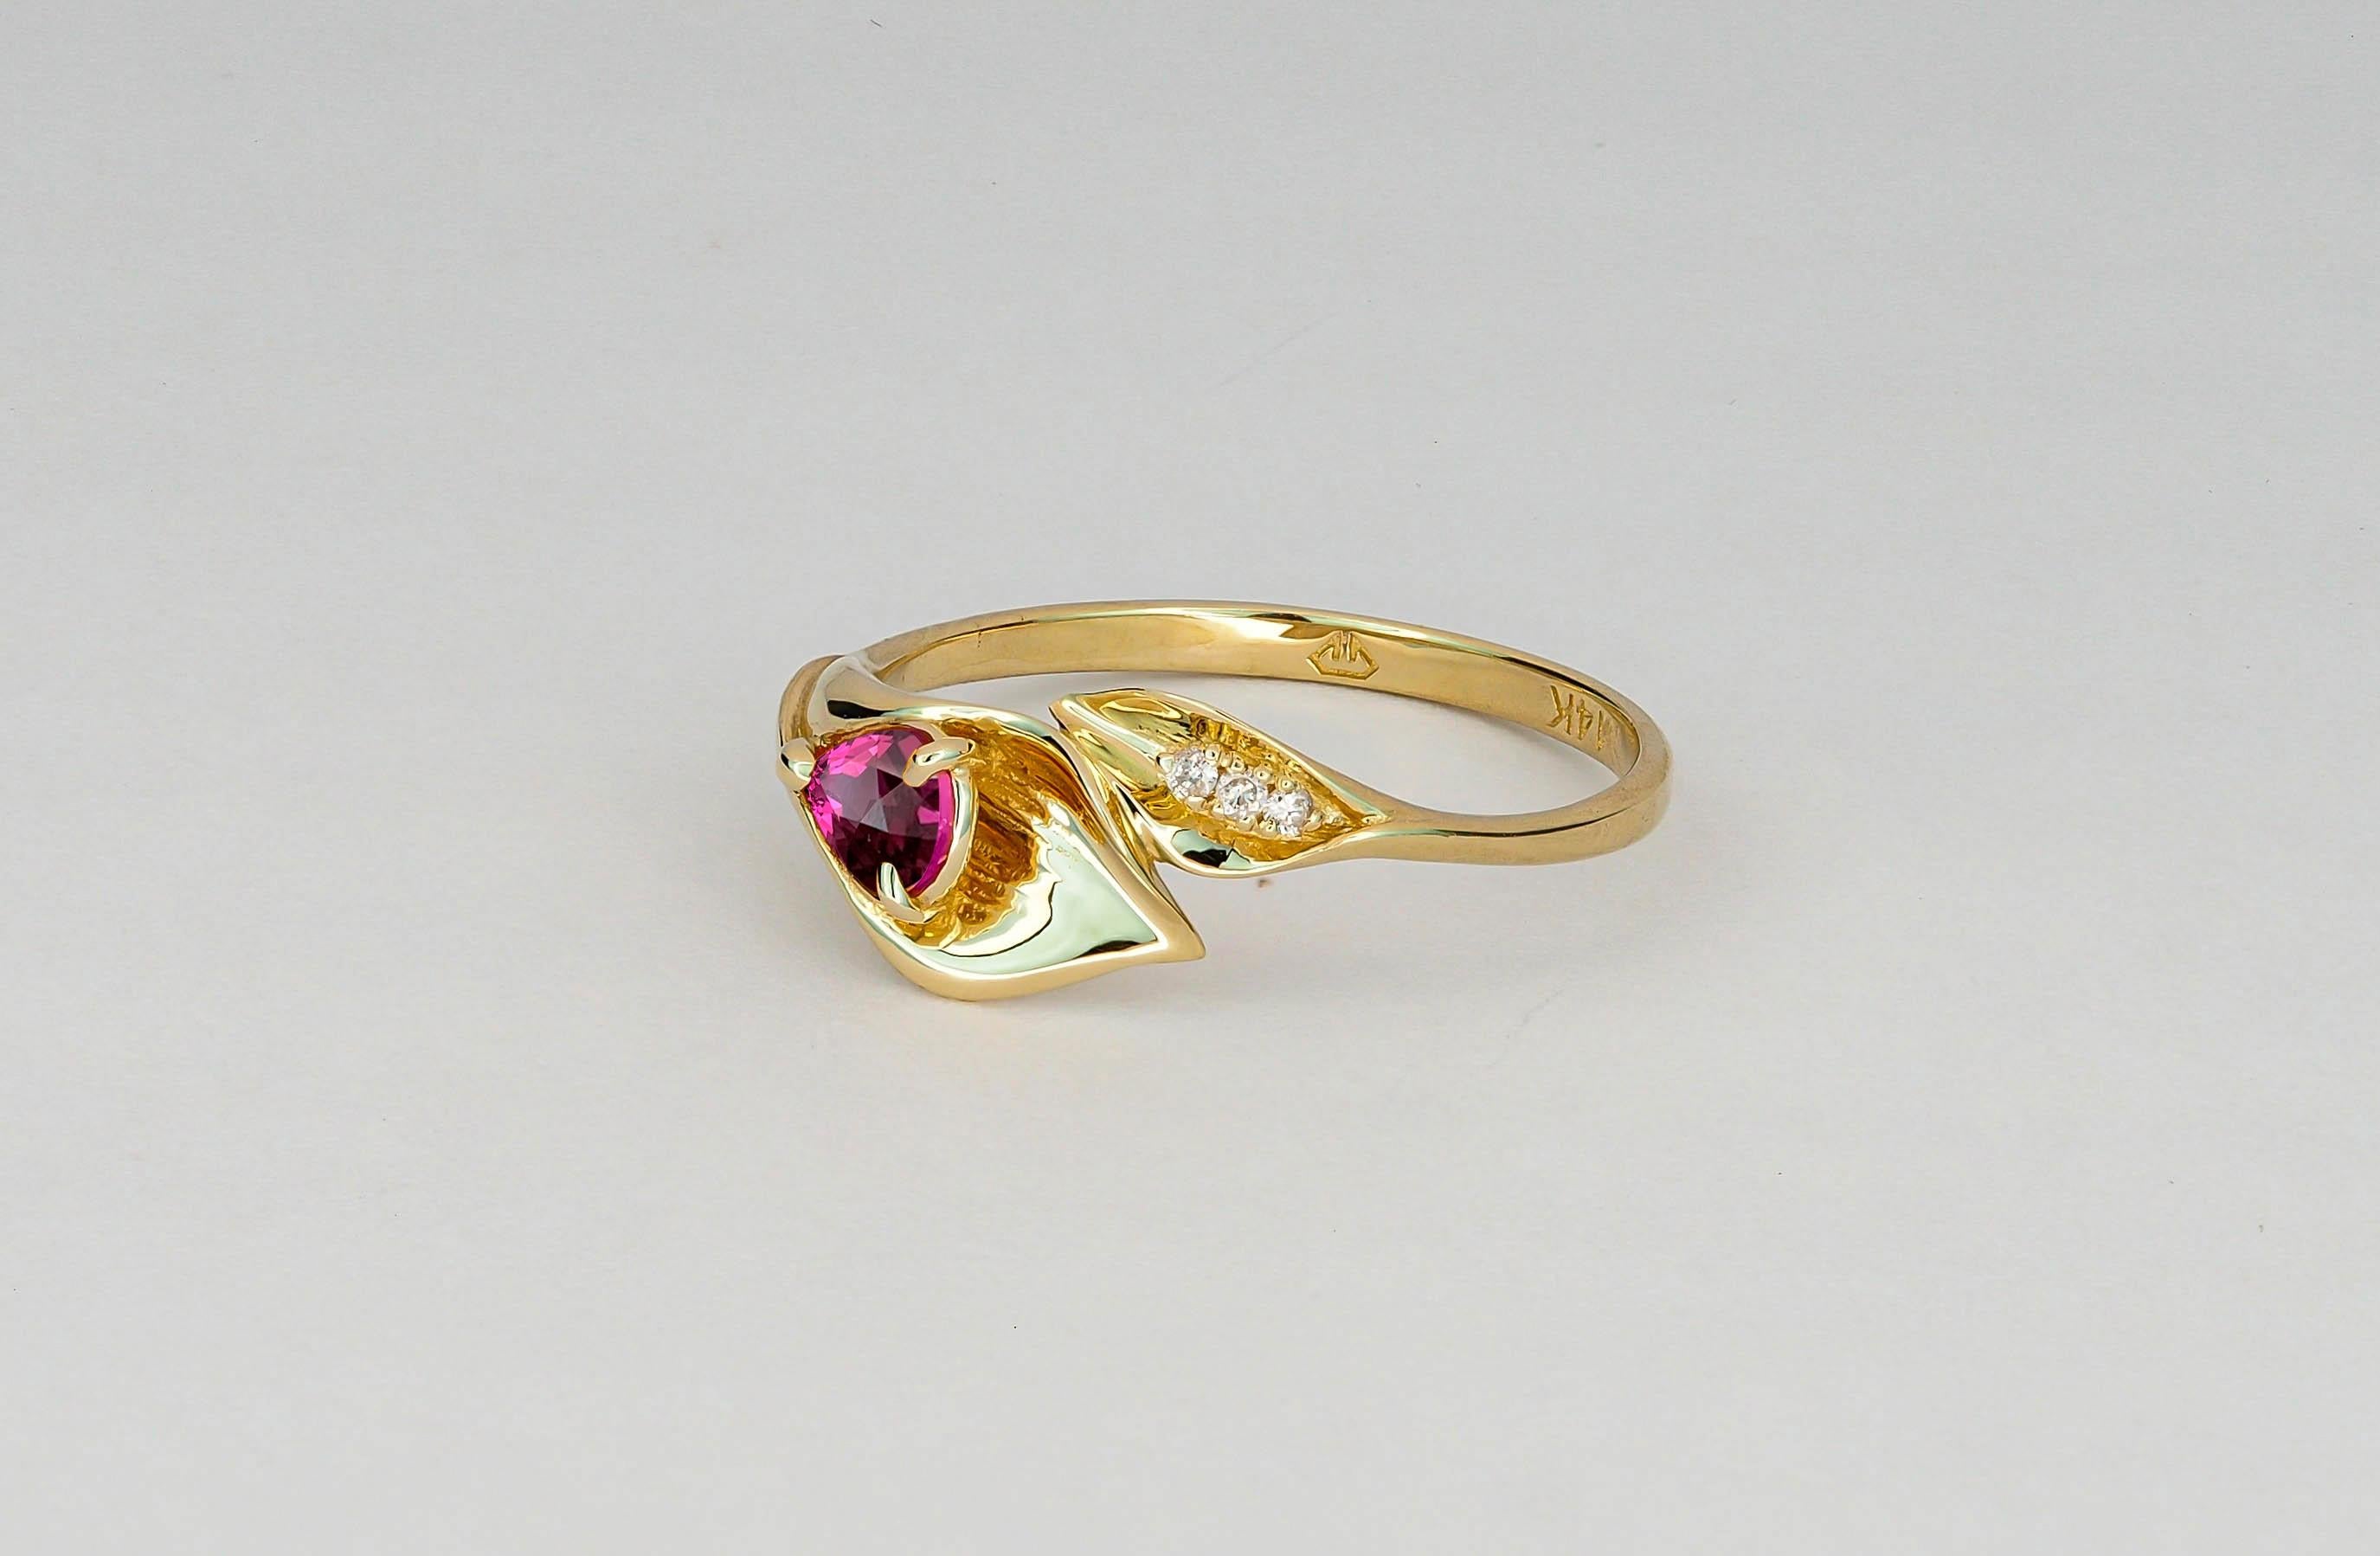 Pear Cut Lily Calla Gold Ring, 14 Karat Gold Ring with Garnet and Diamonds